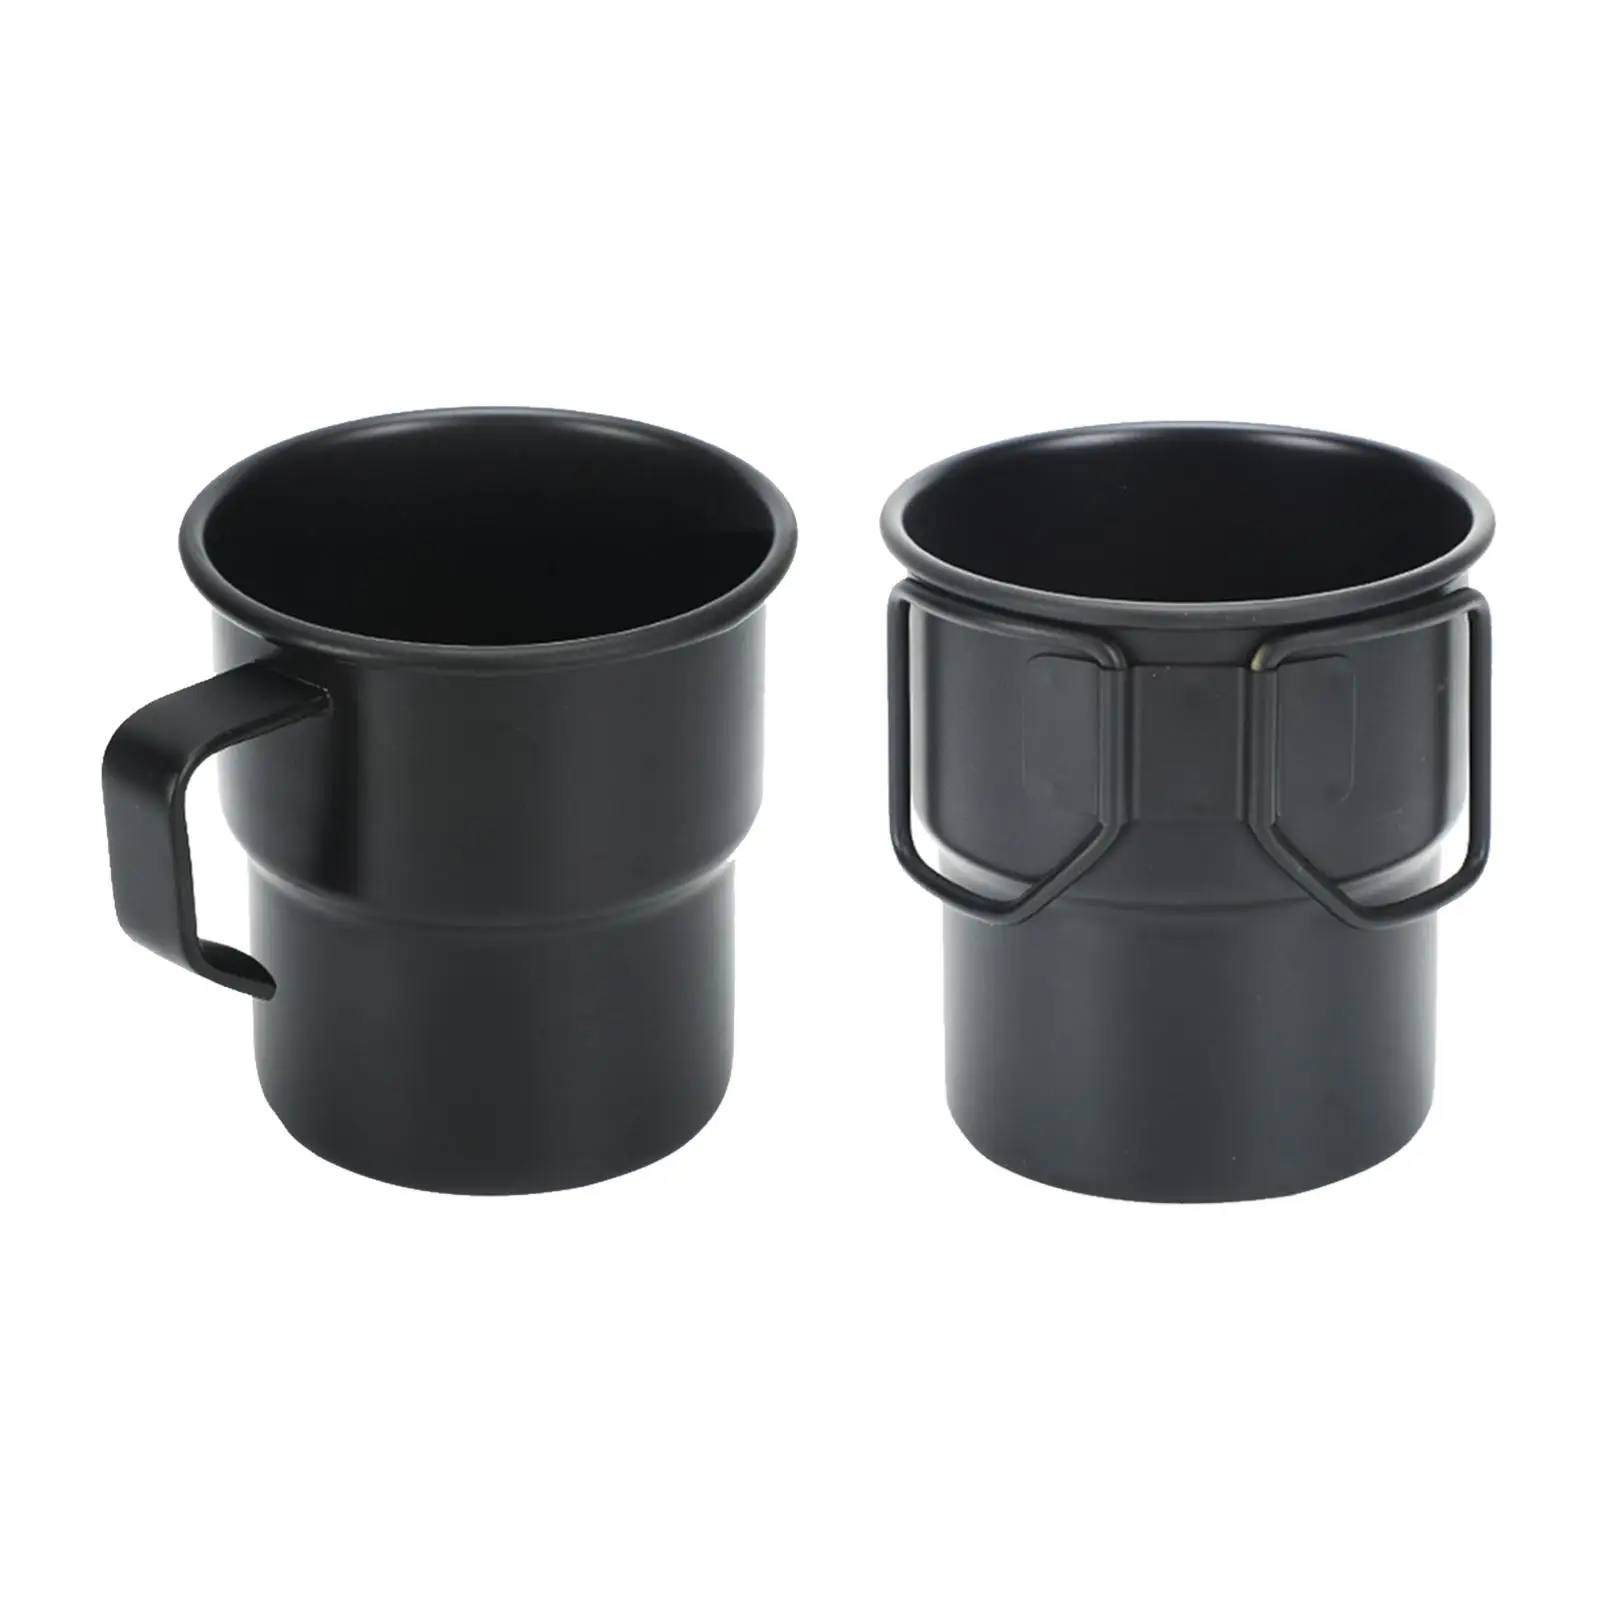 Lightweight Camping Cup Tableware Outdoor Tea Coffee Mug for Picnic Hiking